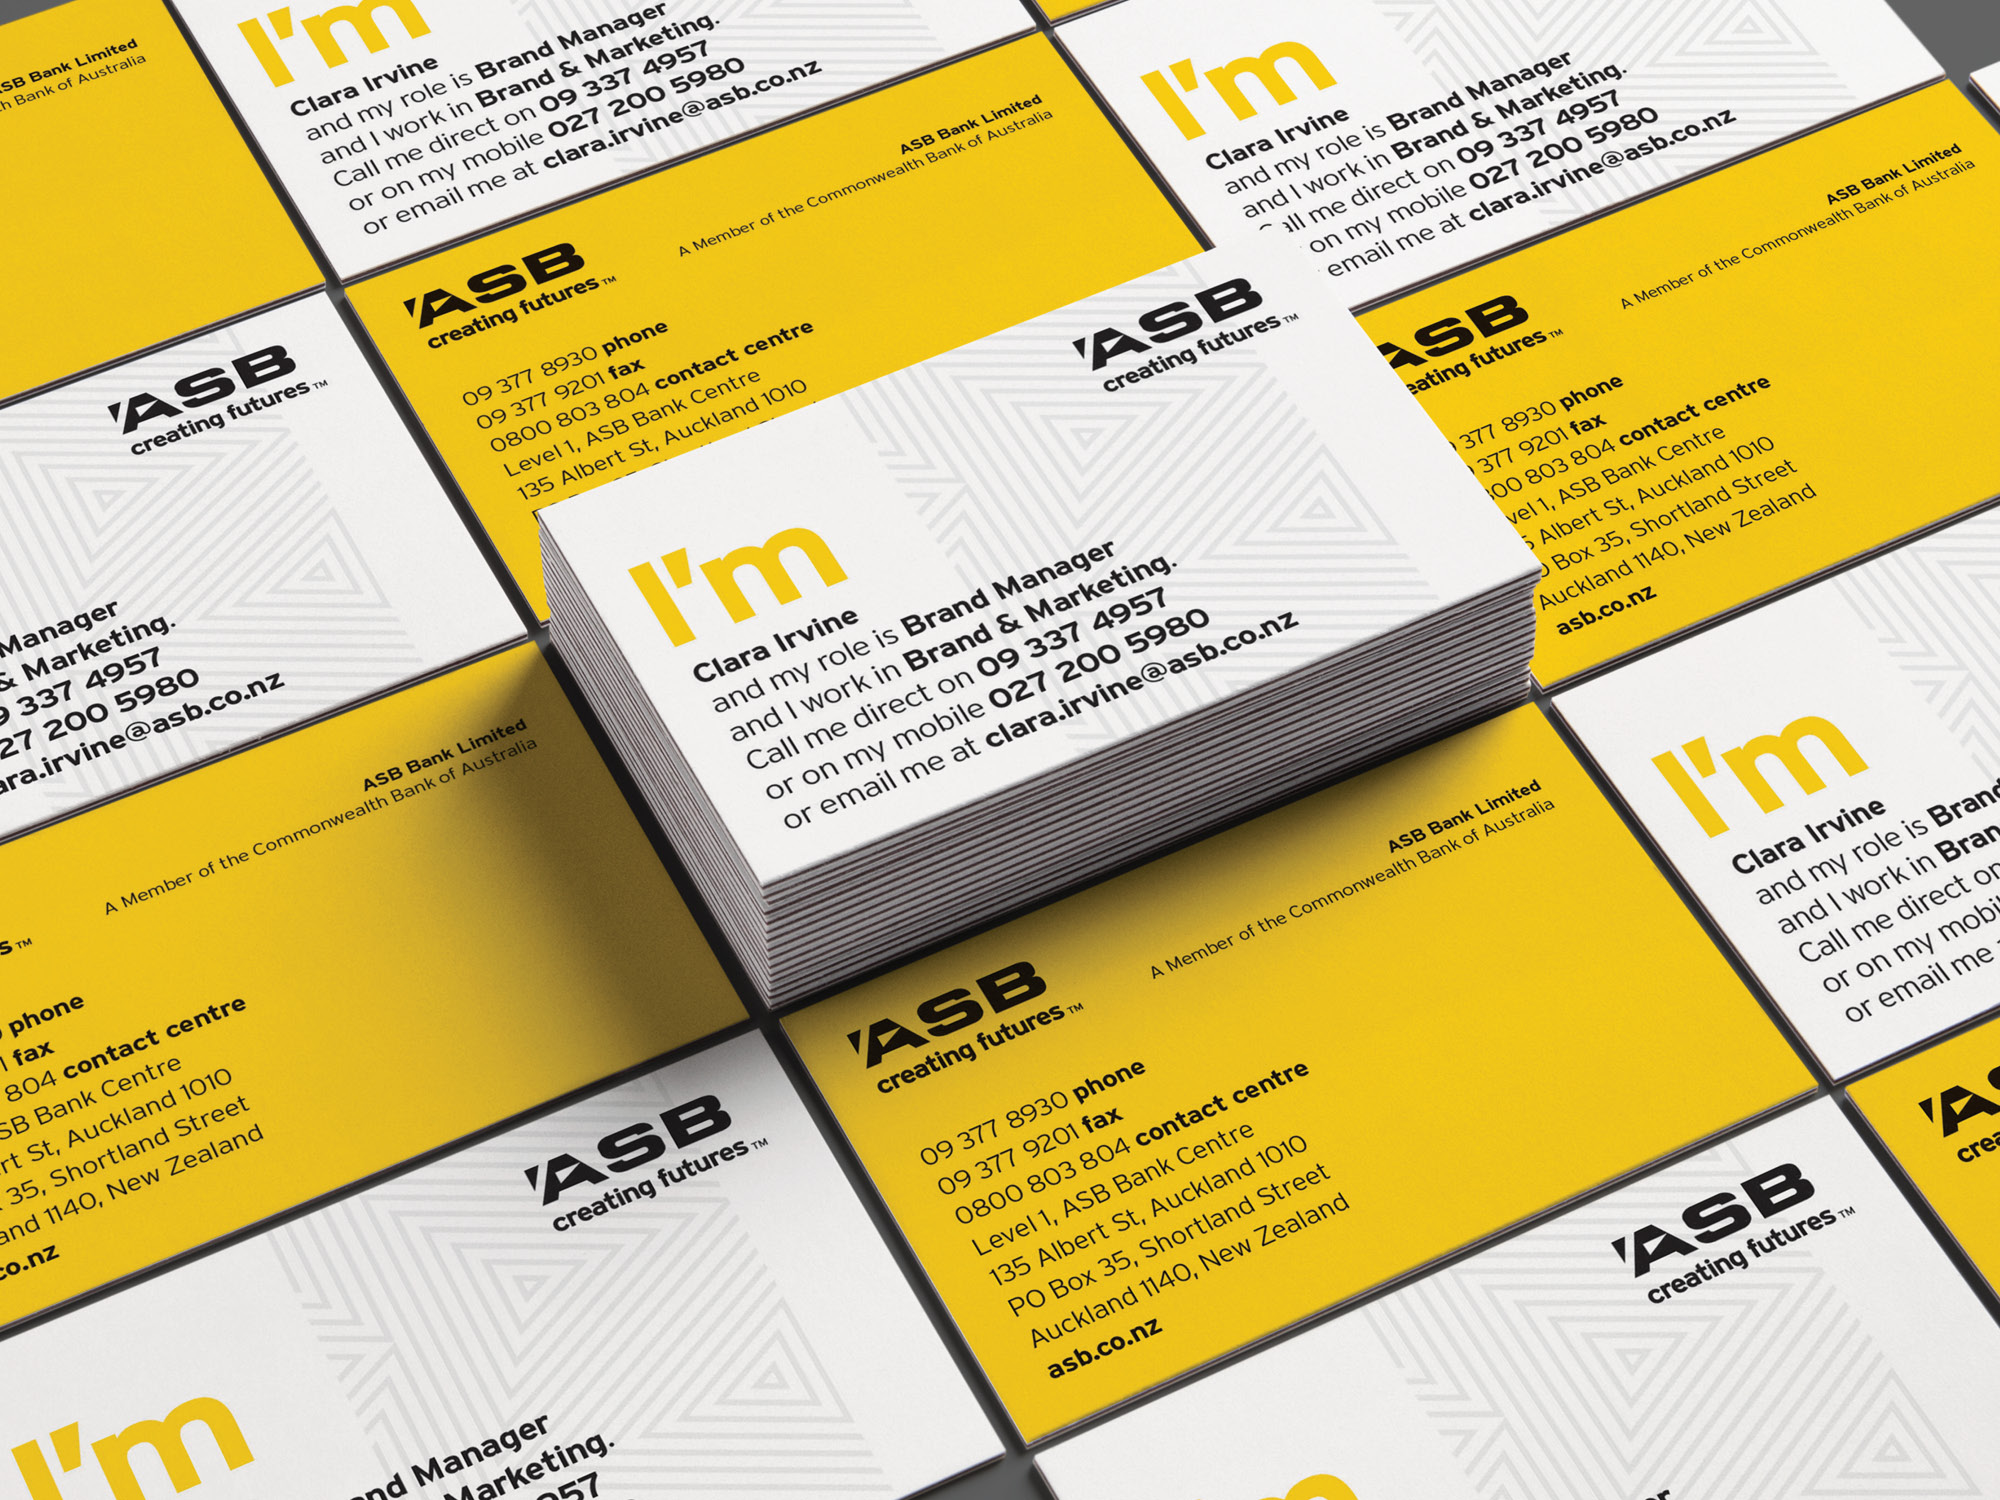 onfire design asb bank branding collateral graphic design 7